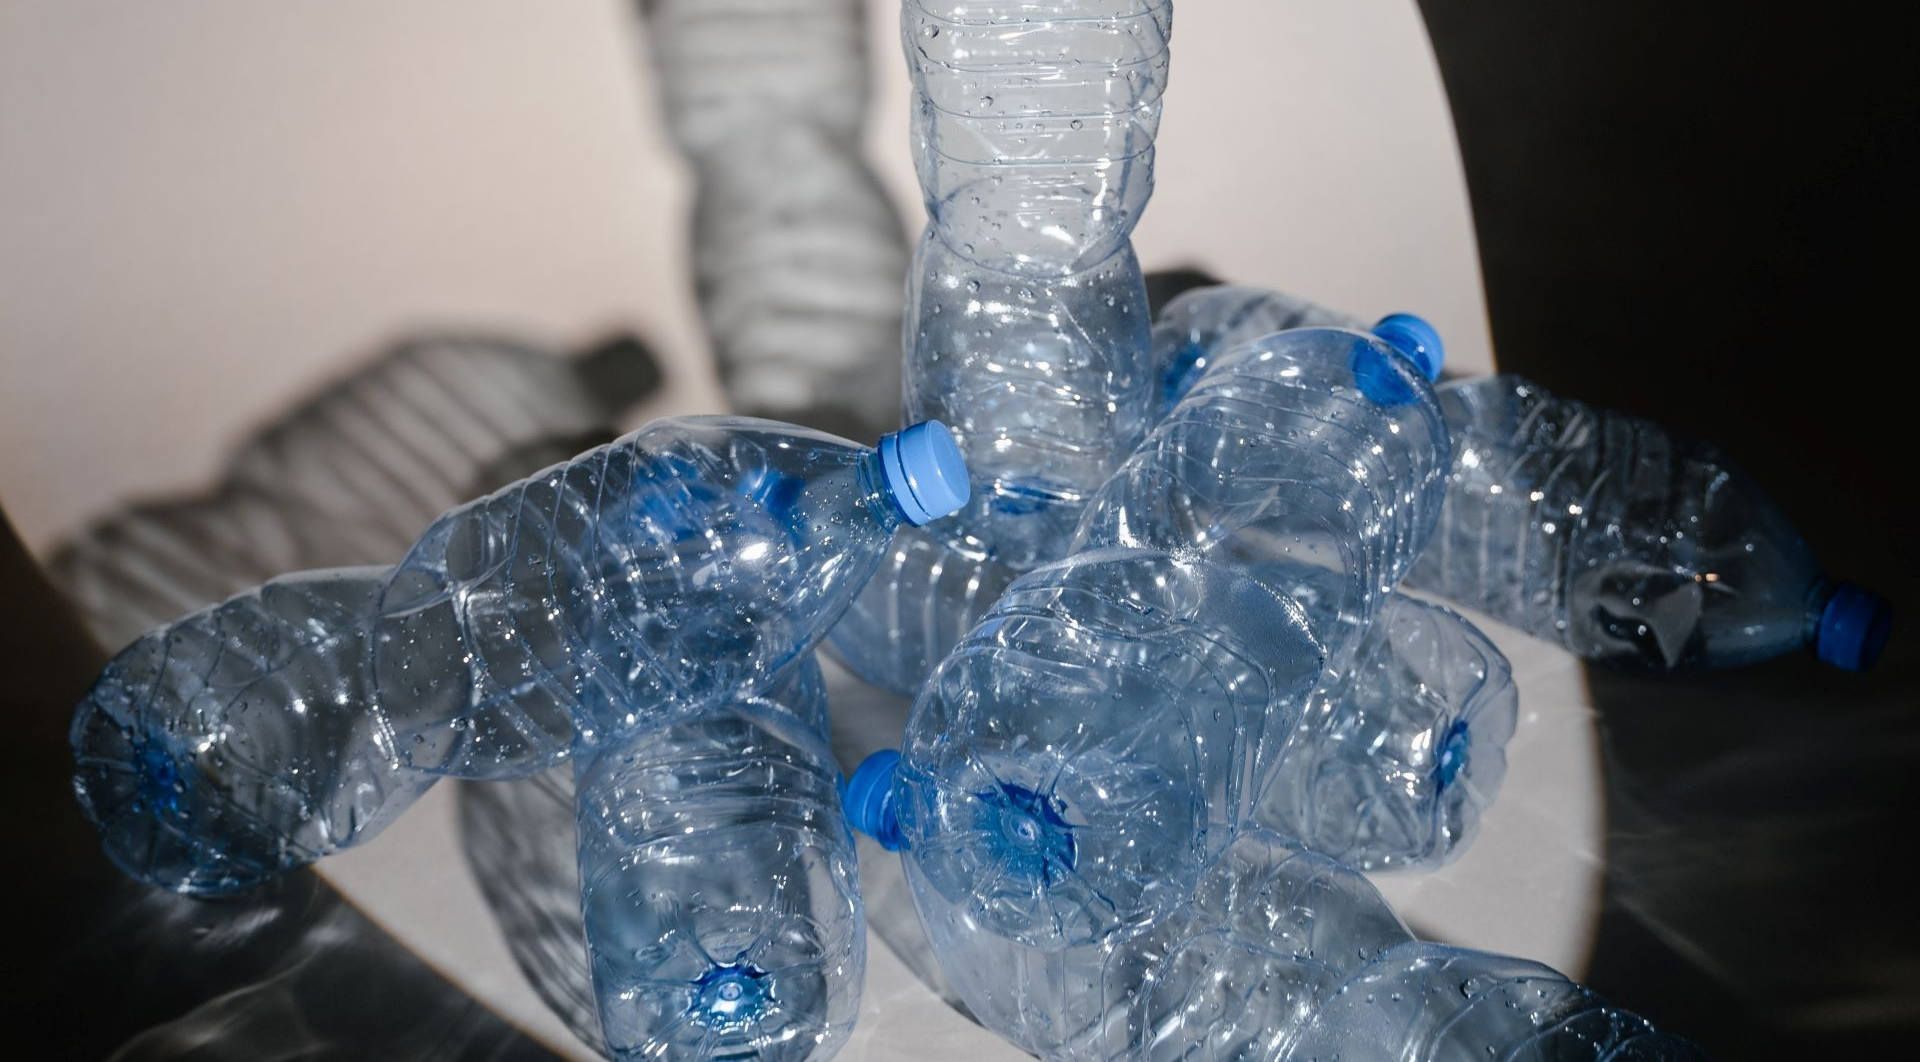 History of Plastic Water Bottles: How Did They Become So Ubiquitous?